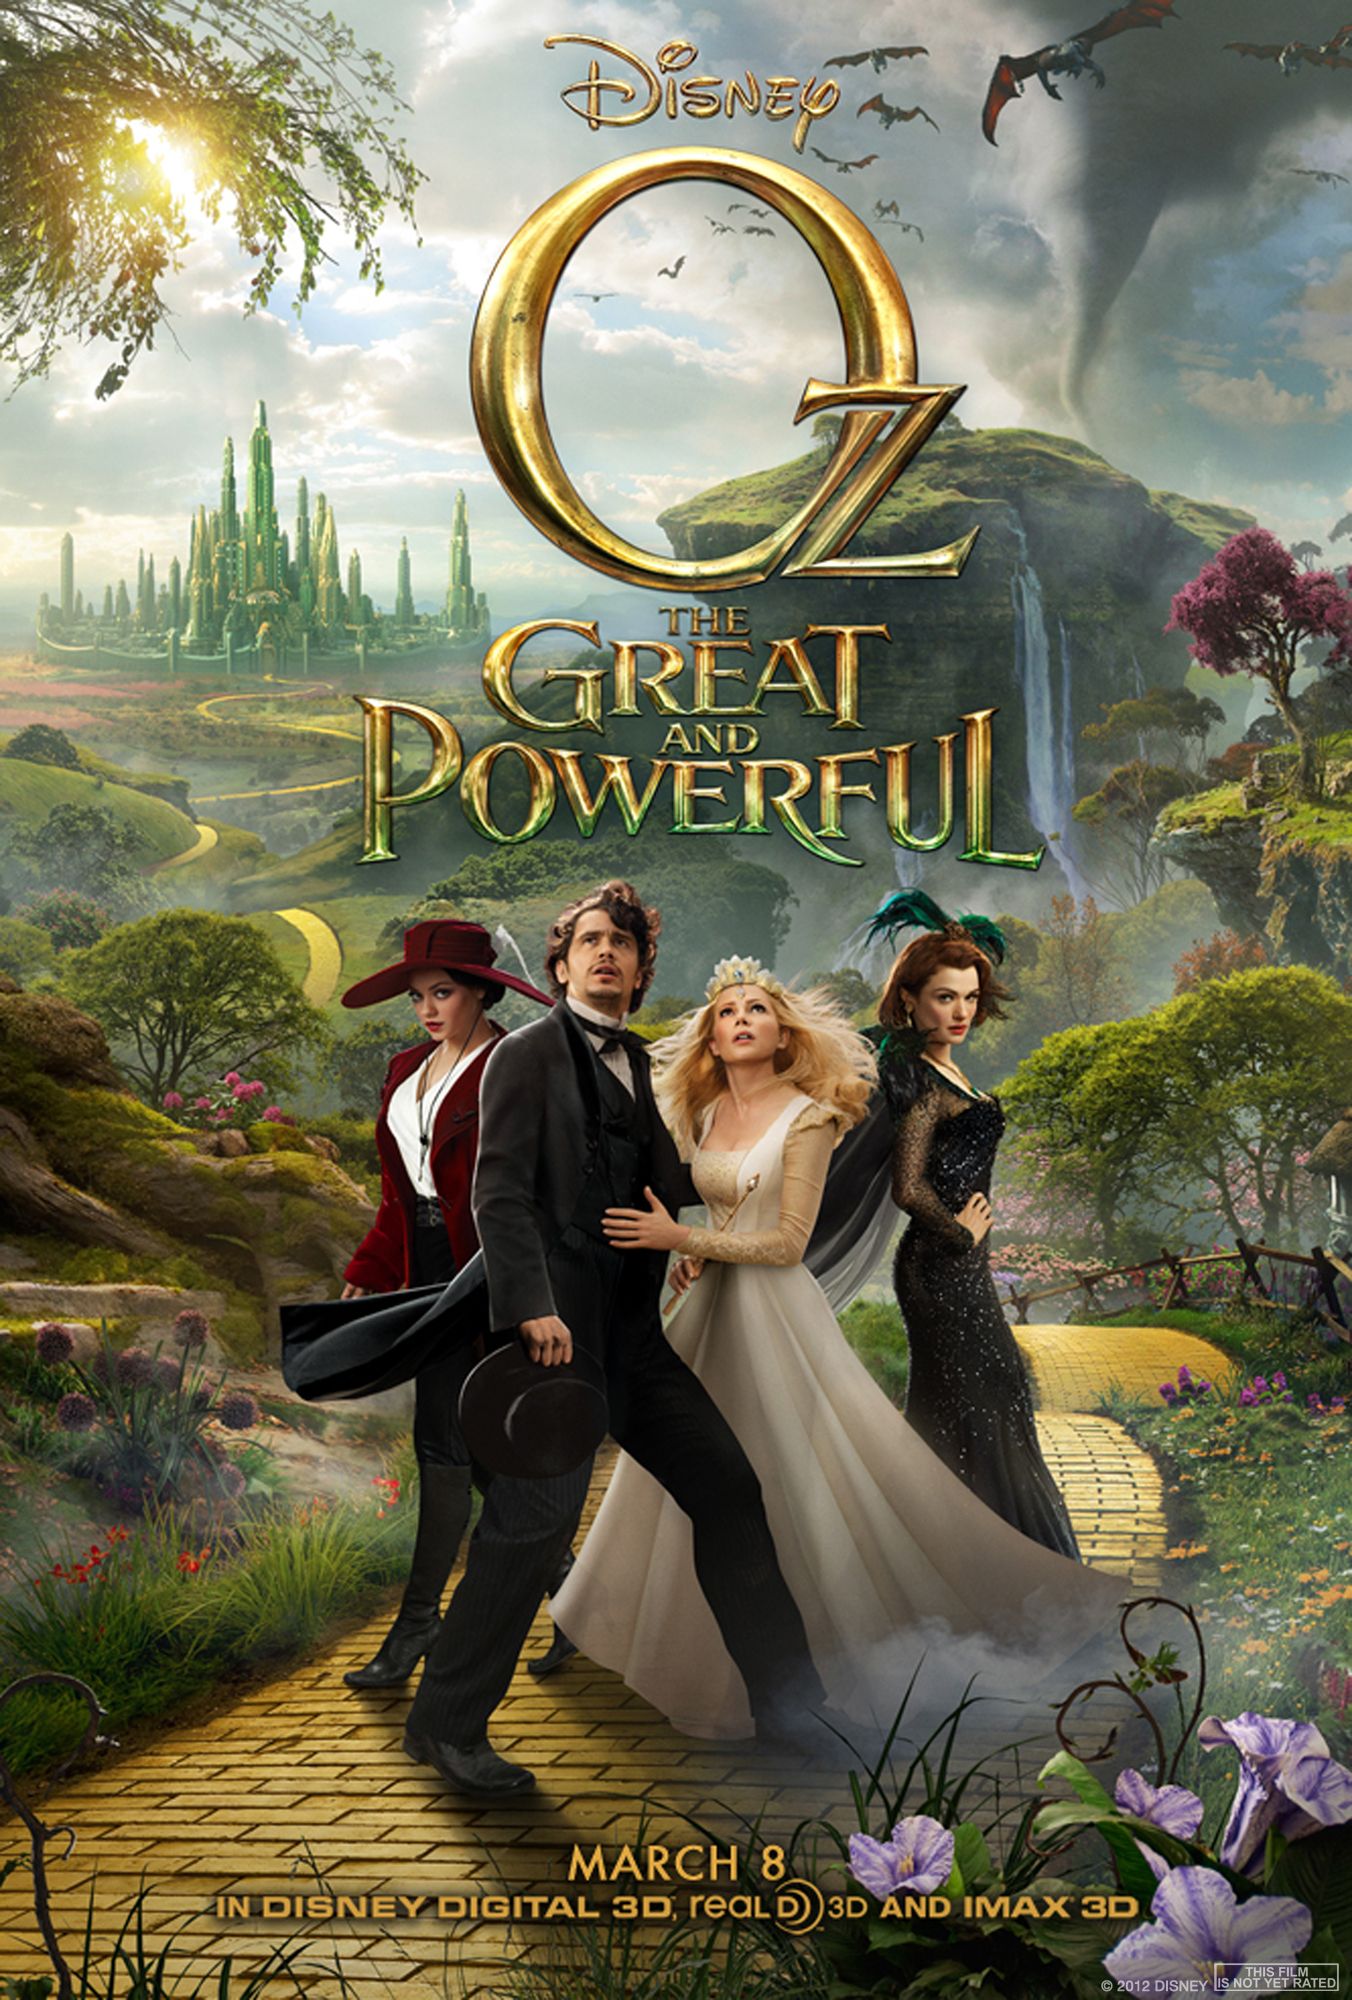 Oz the Great and Powerful (2013) Hindi Dubbed BluRay download full movie